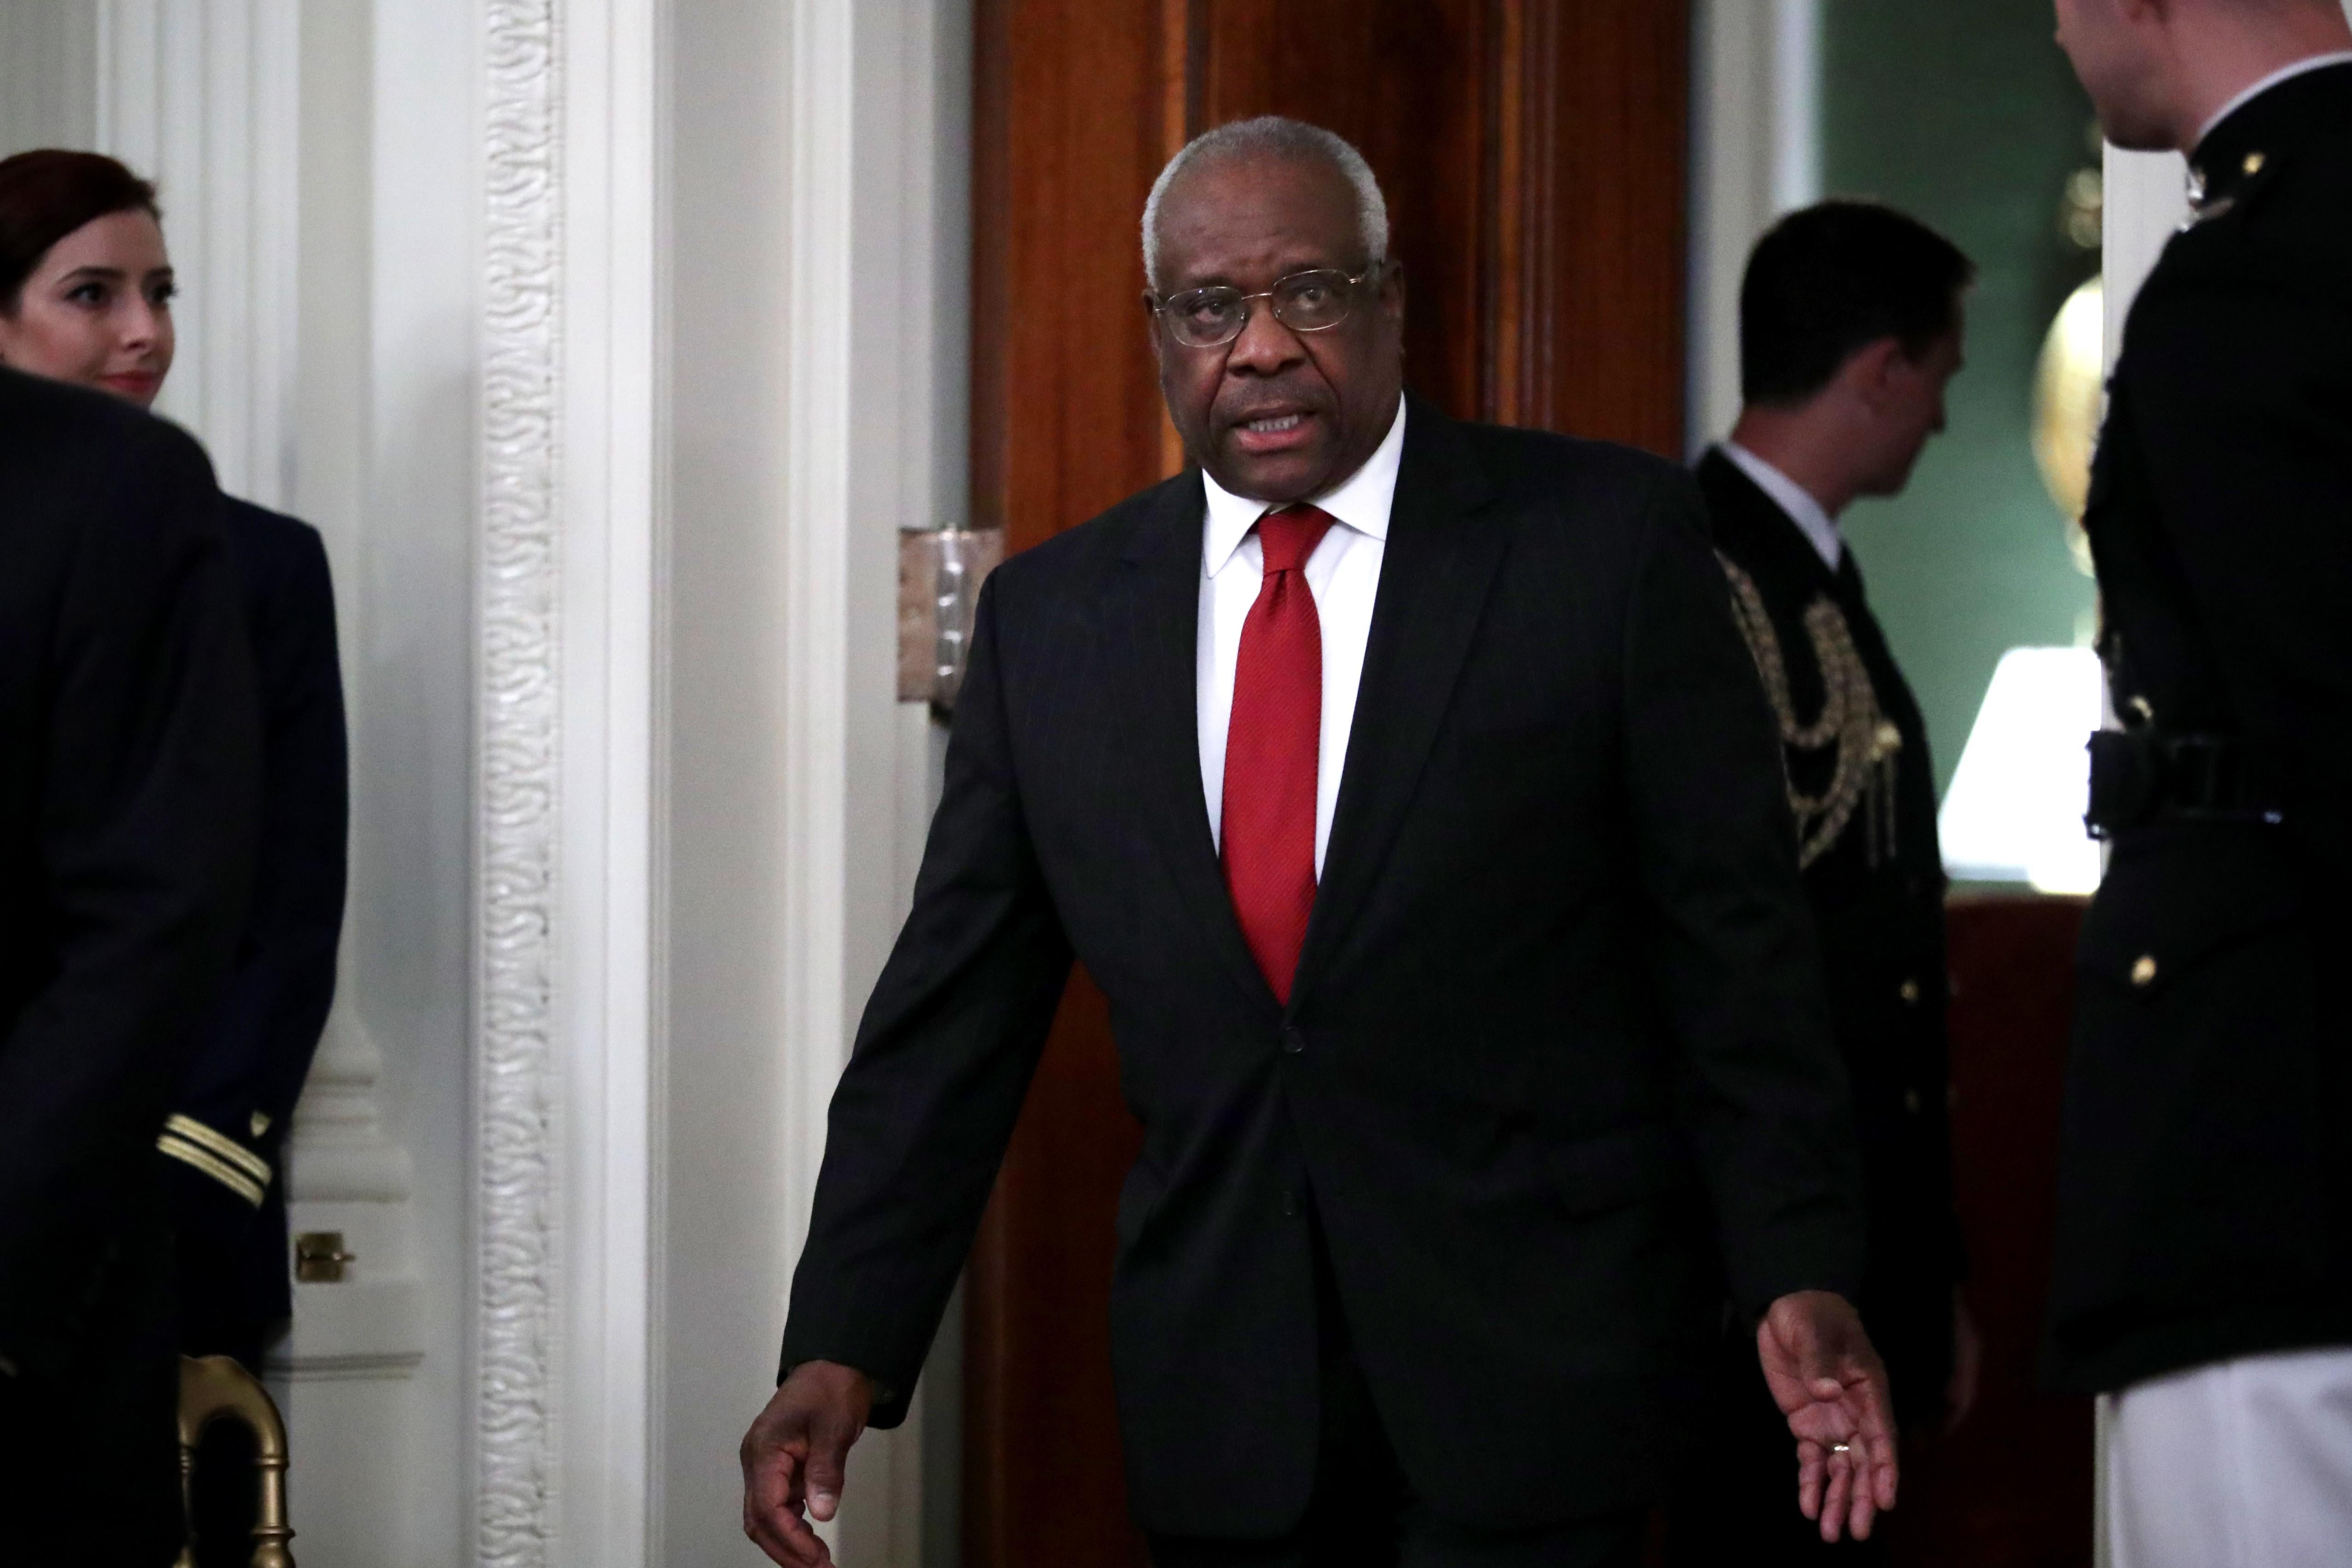 Justice Clarence Thomas walks into a room with a decisive stride.